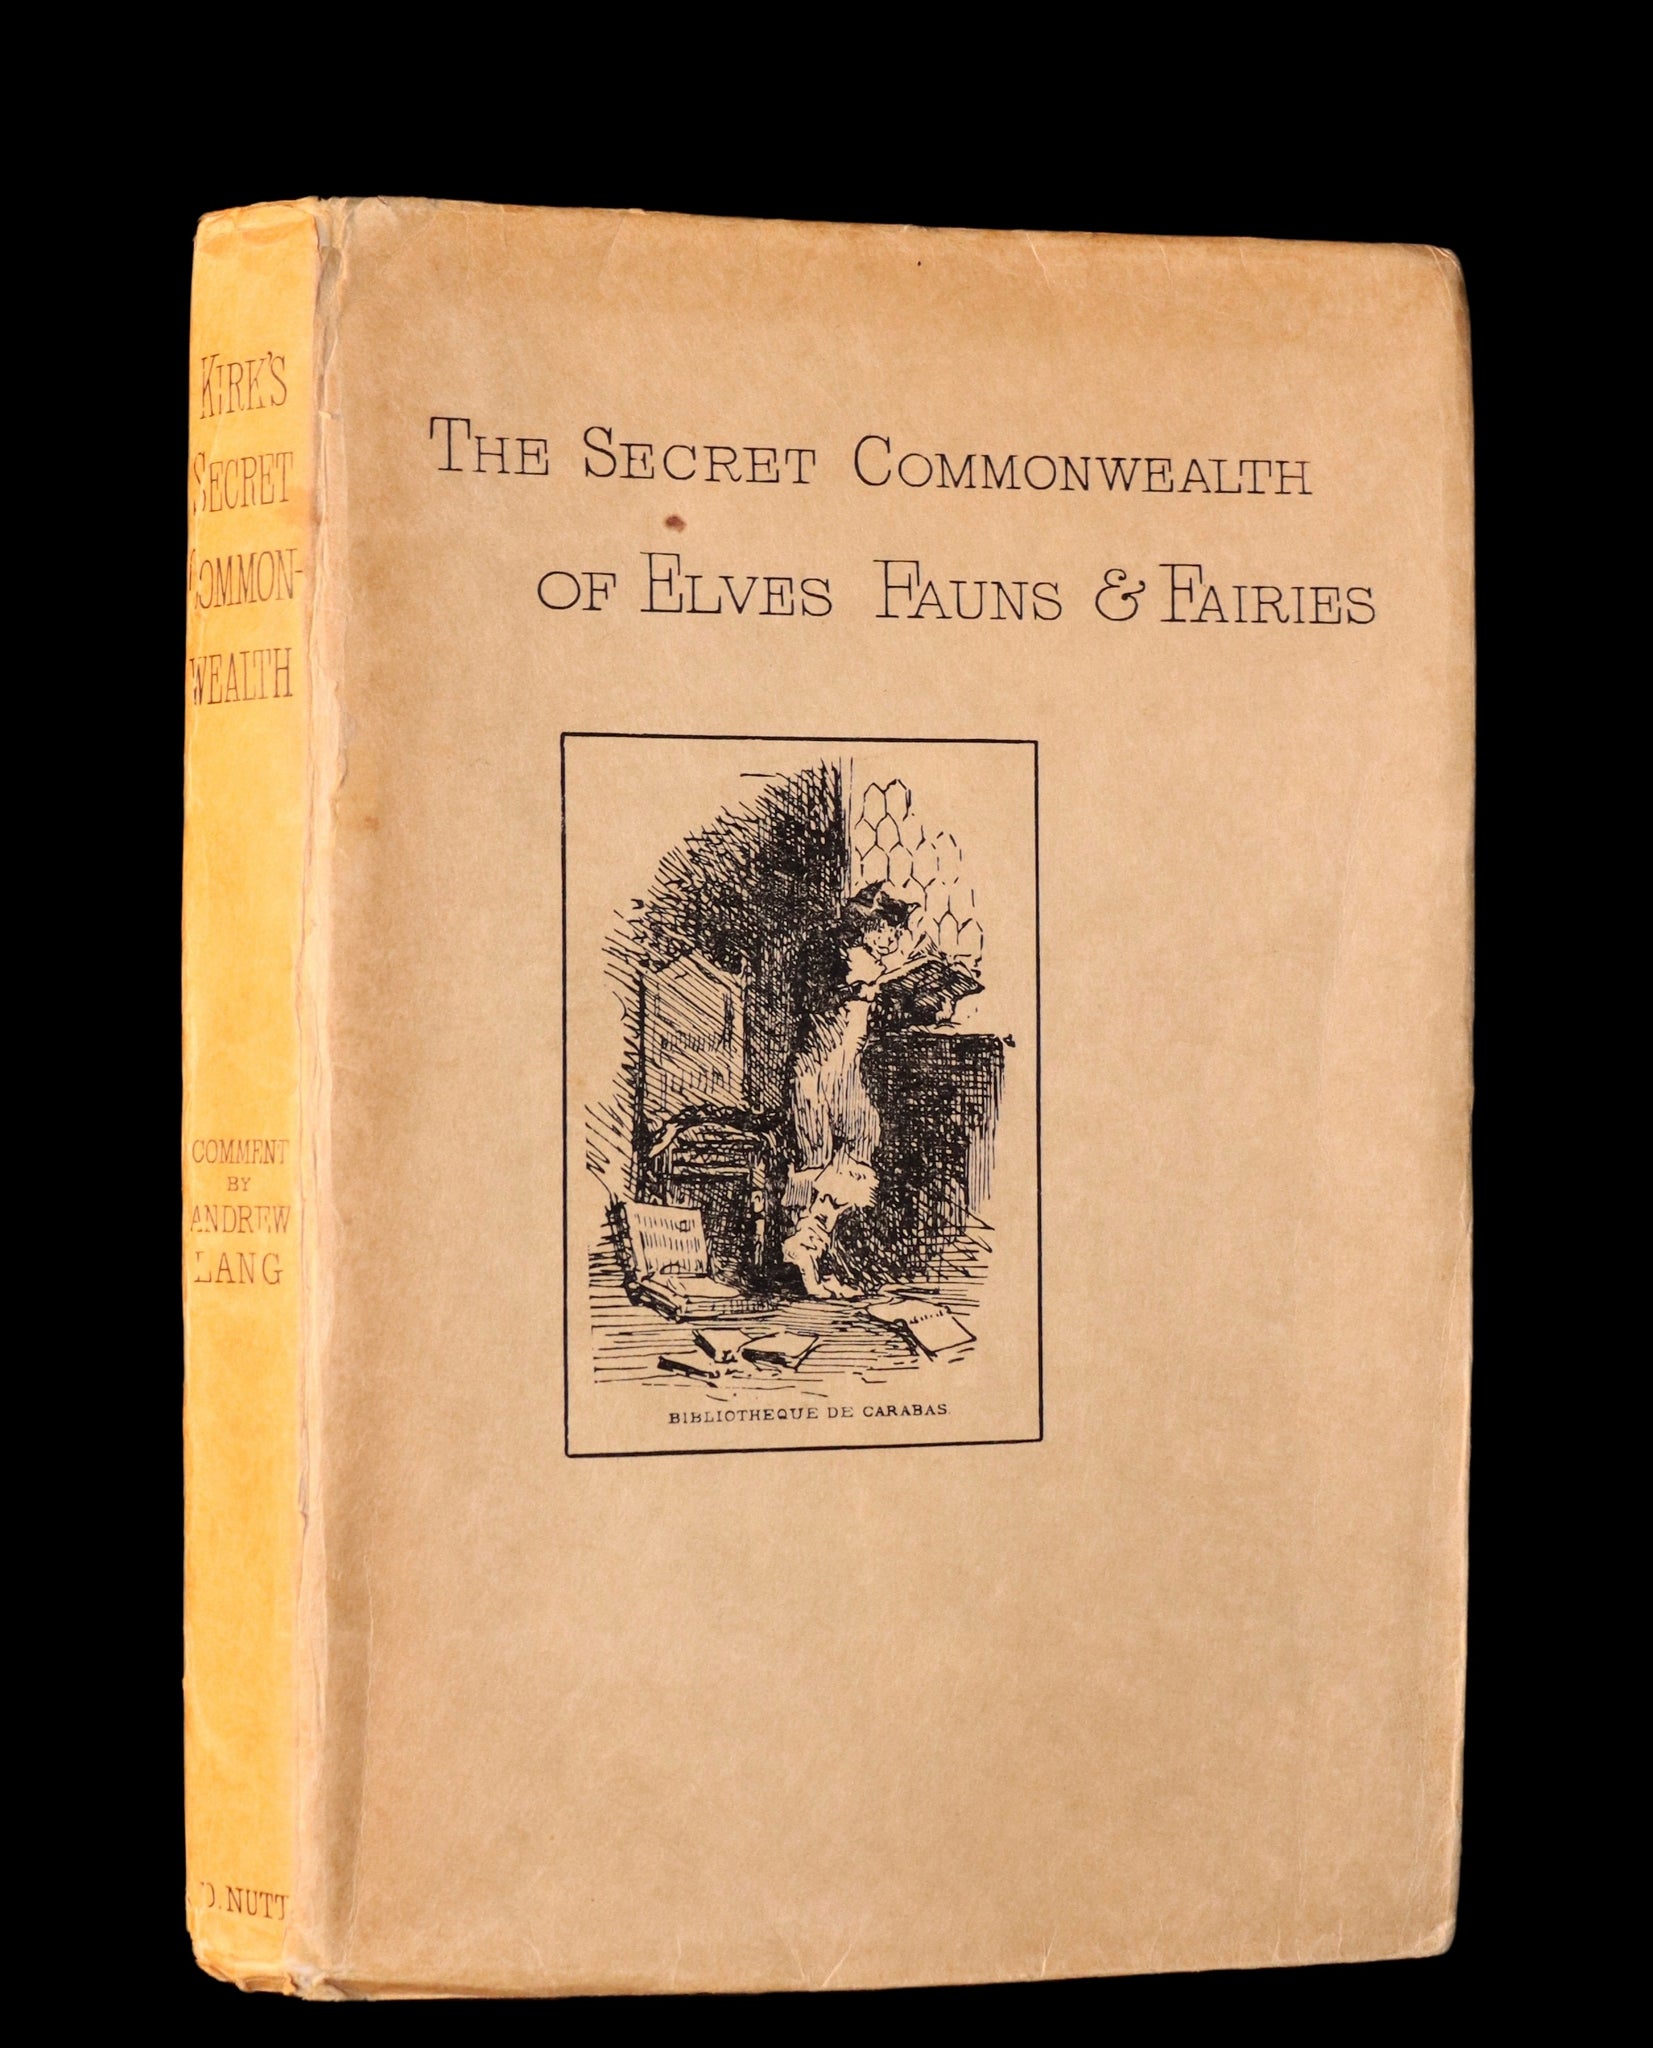 1893 Scarce Book - The Secret Commonwealth of Elves Fauns & Fairies by Robert Kirk.